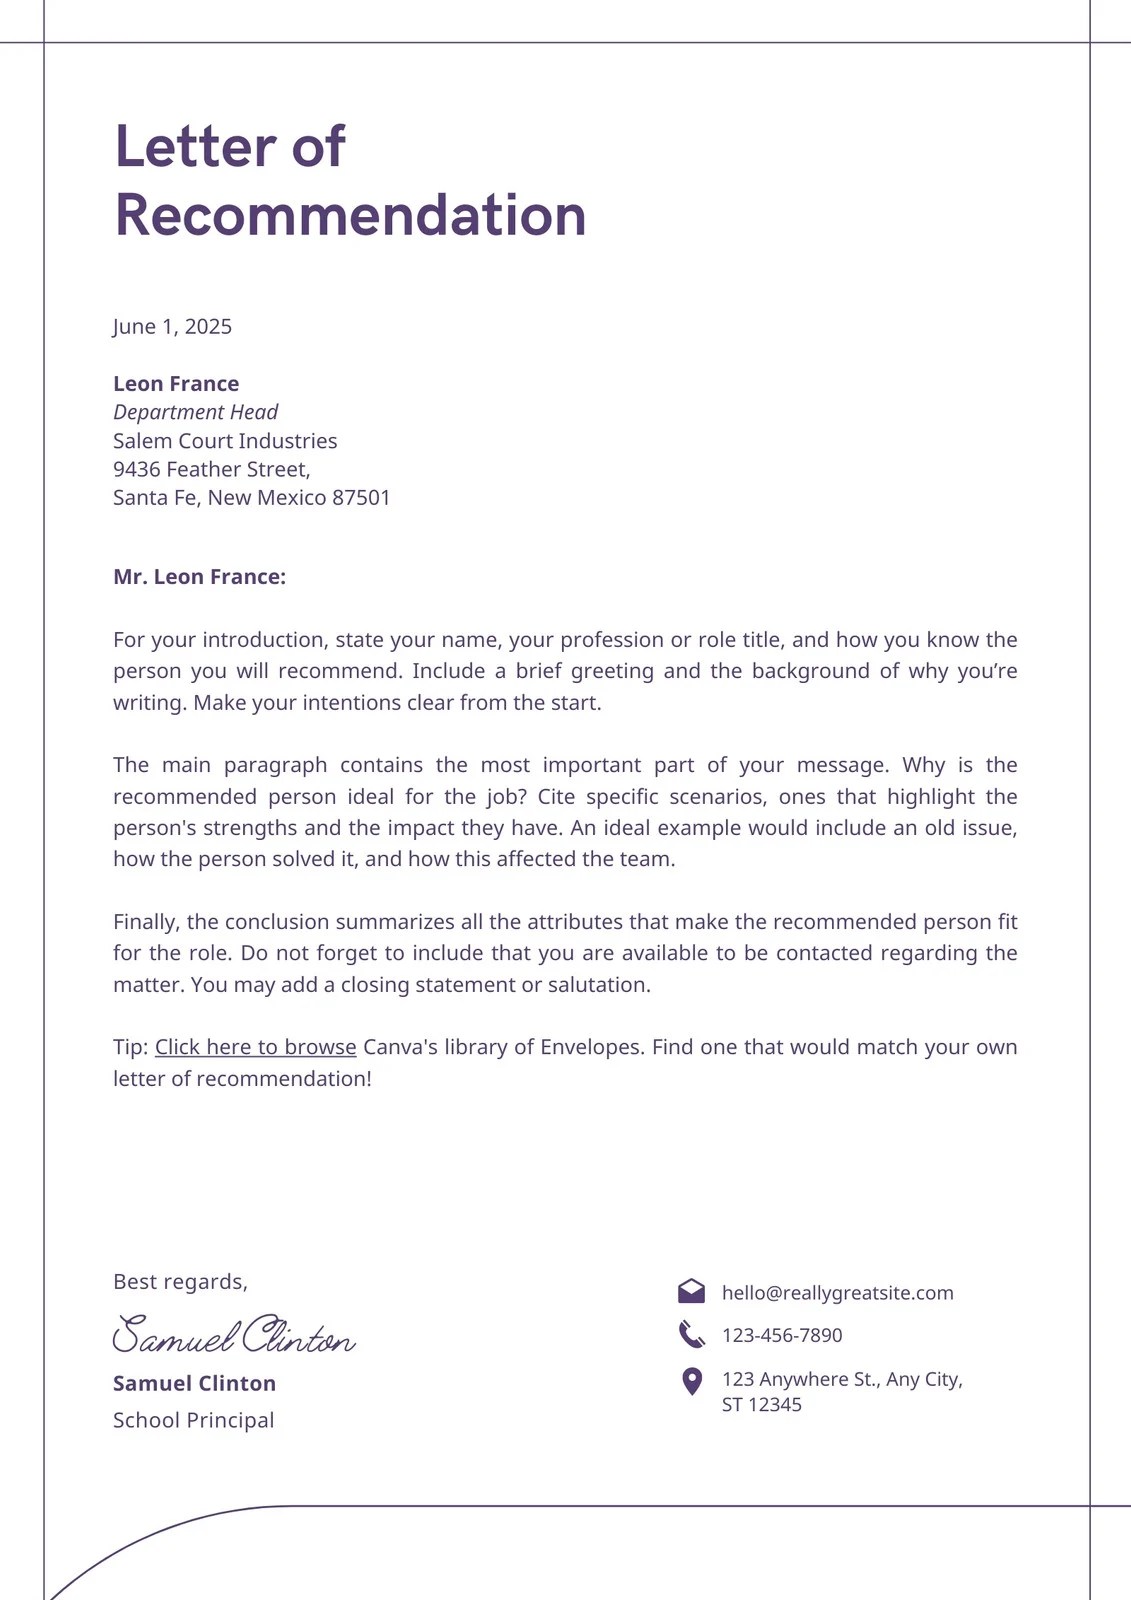 Sample Good Character Reference Letter For Court